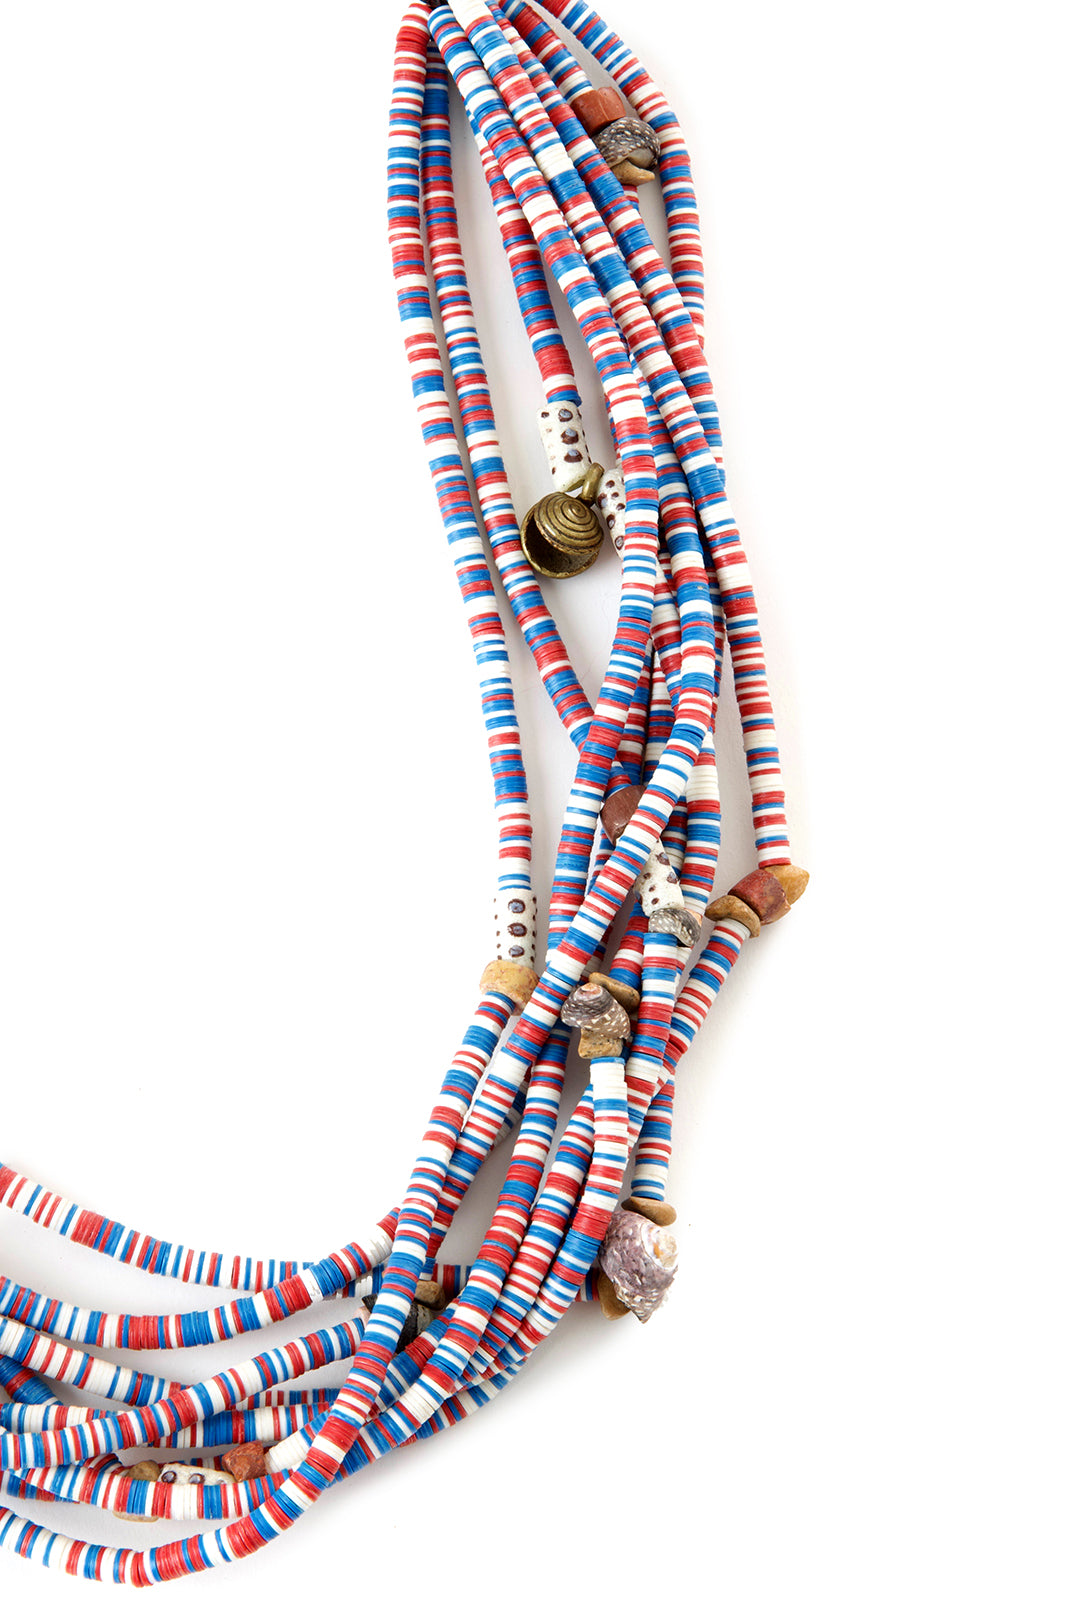 Red, White and Blue Heishi Bead Necklace from Ghana